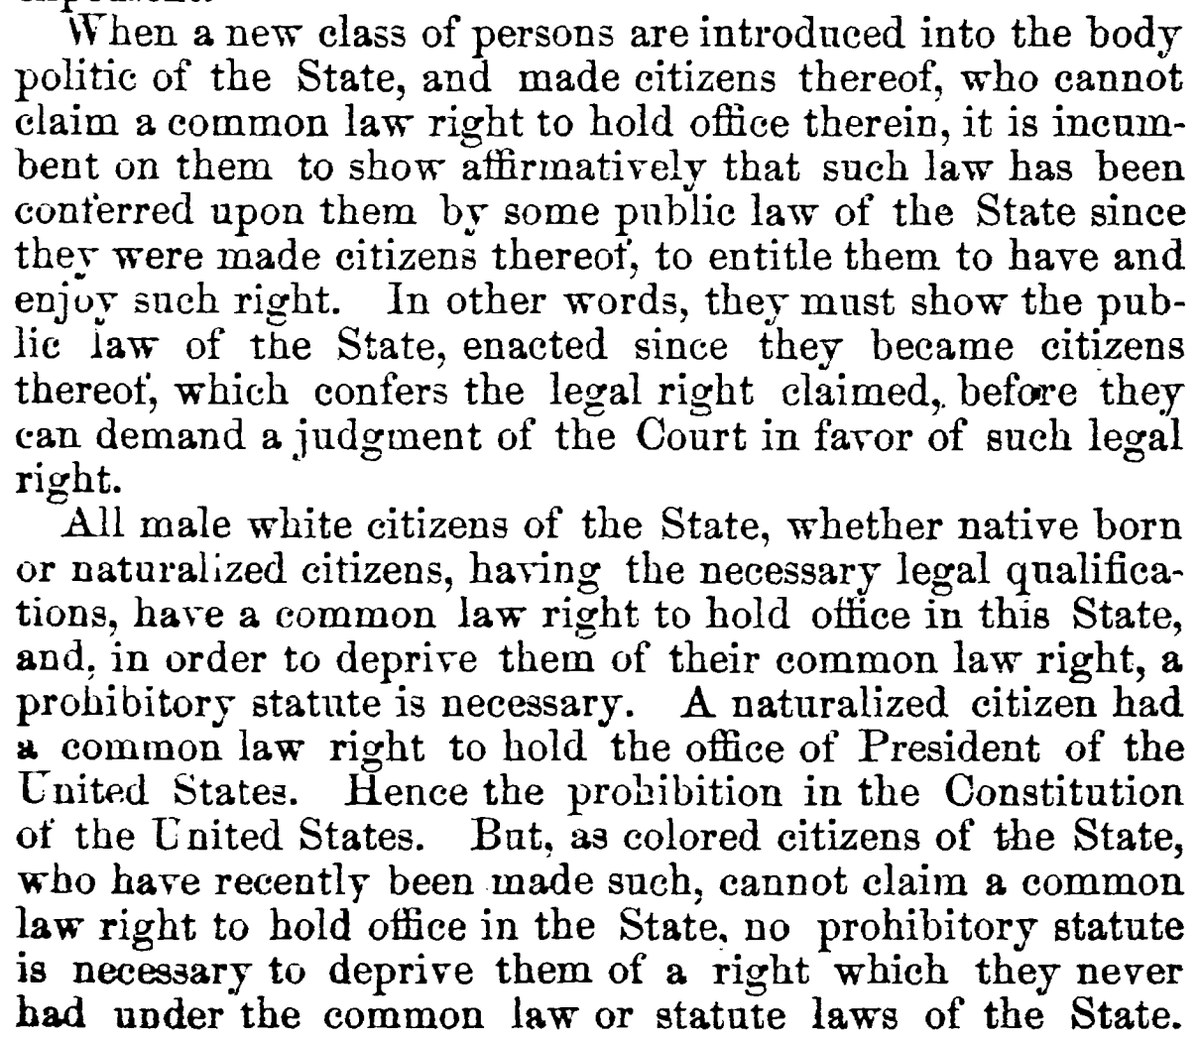 The KKK ran the DULY ELECTED "Original 33" out of office. Then the Ga. Supreme Court ruled that black people were technically citizens, but the Ga. laws were only meant for white people, so... Black ppl, y'all need to go somewhere with that "equality" shit.**I'm paraphrasing